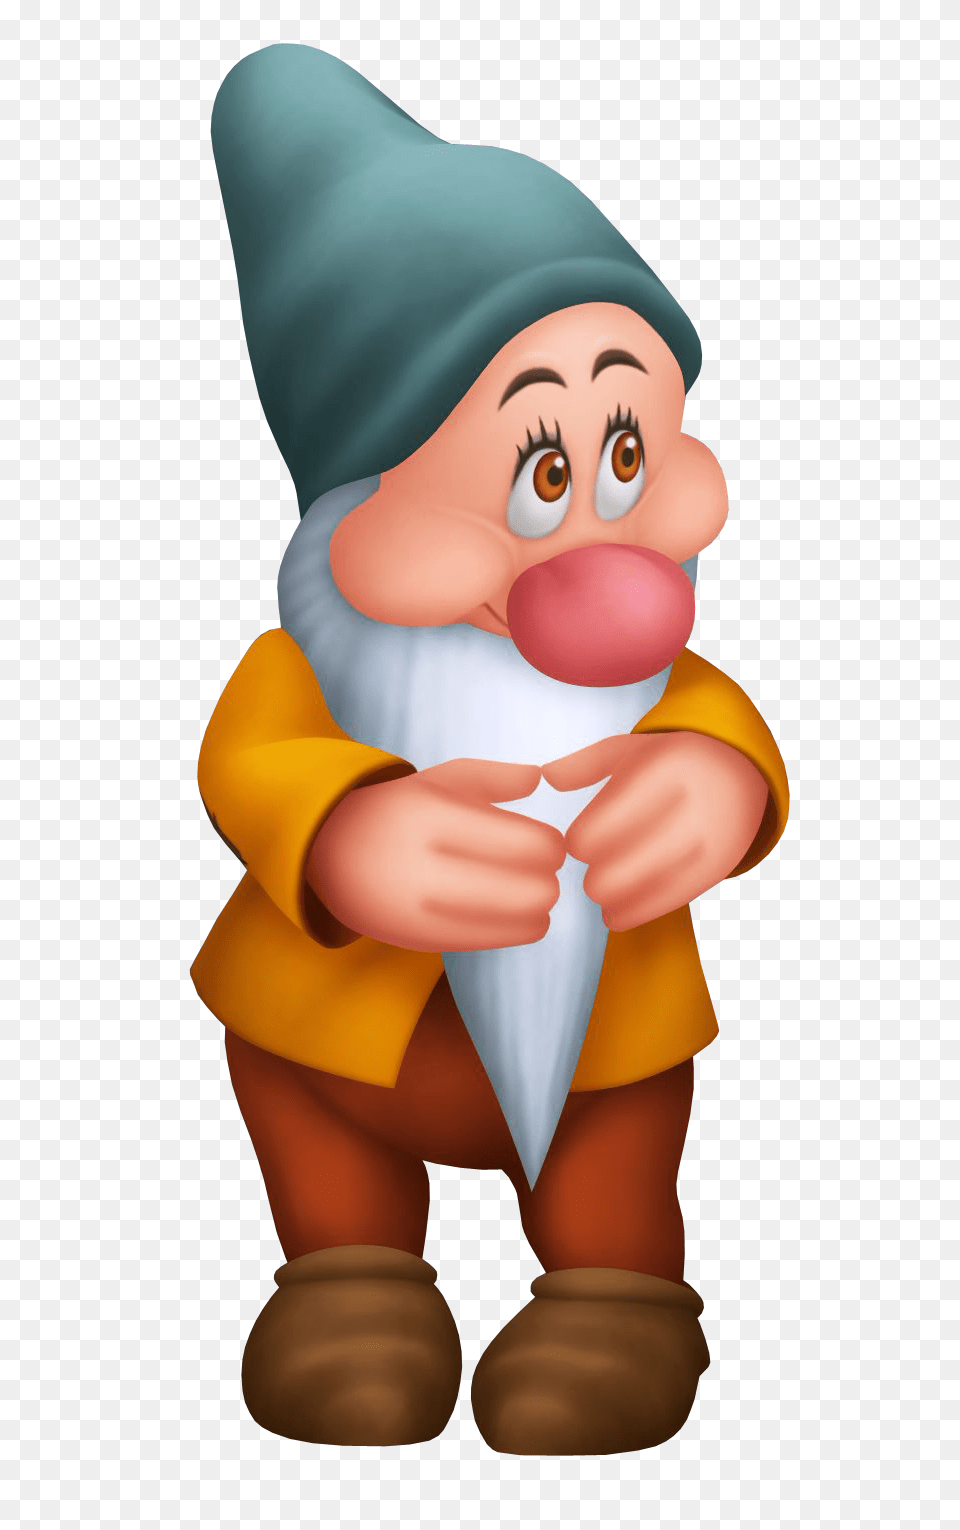 2 Dwarf, Baby, Person, Performer, Clown Png Image